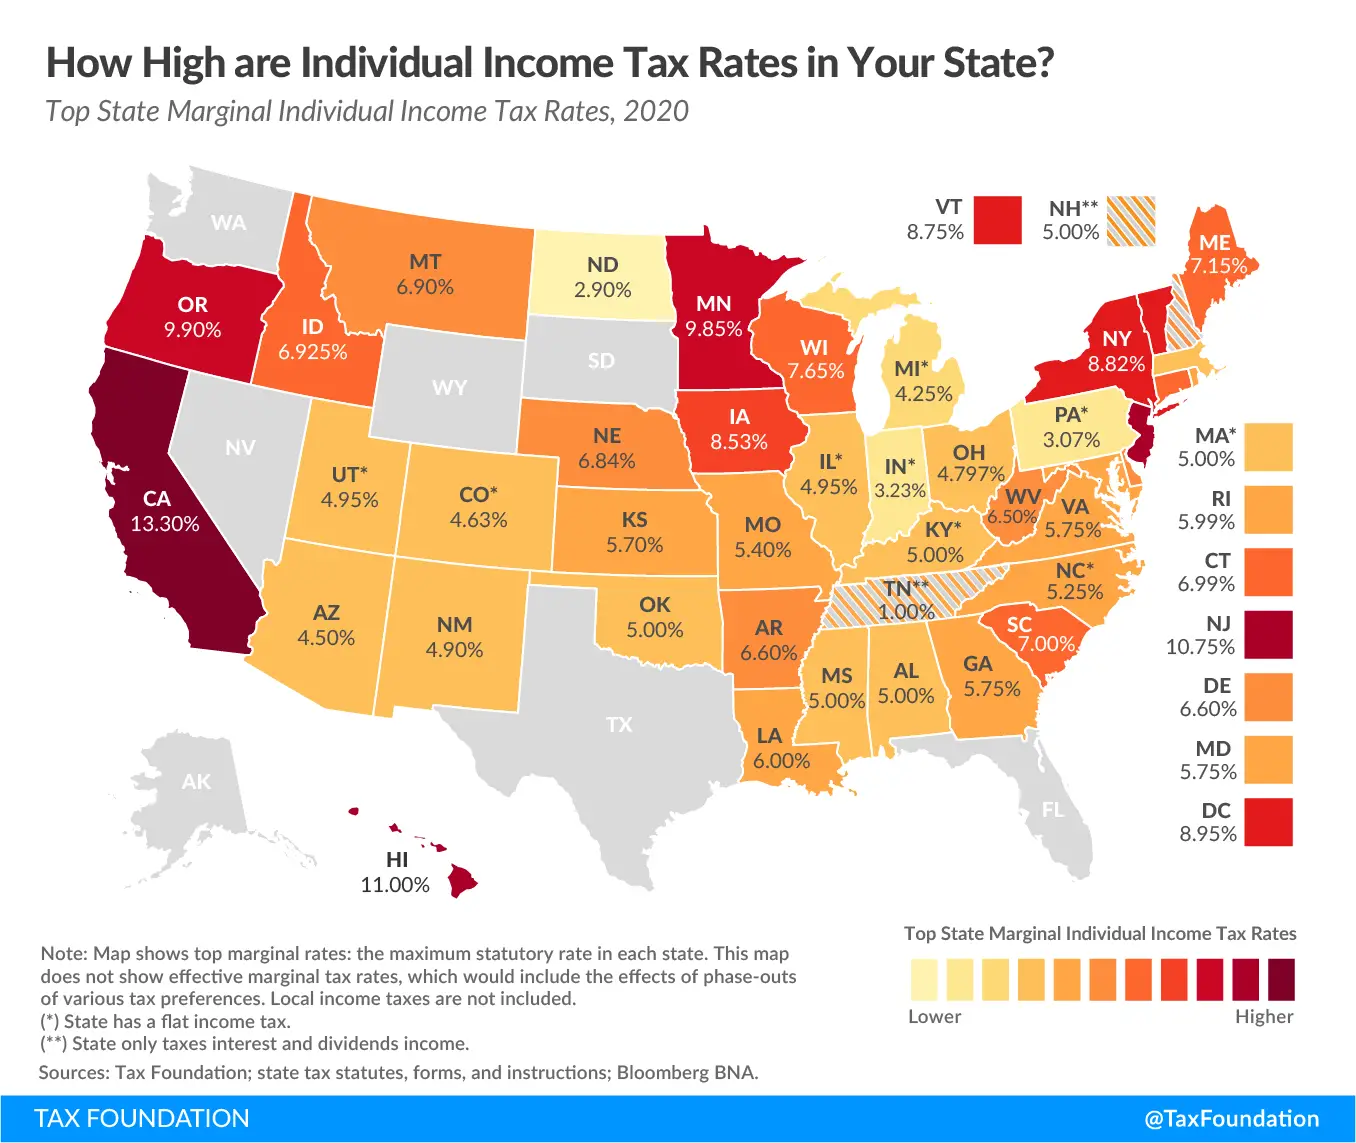 State Individual Income Tax Rates and Brackets for 2020